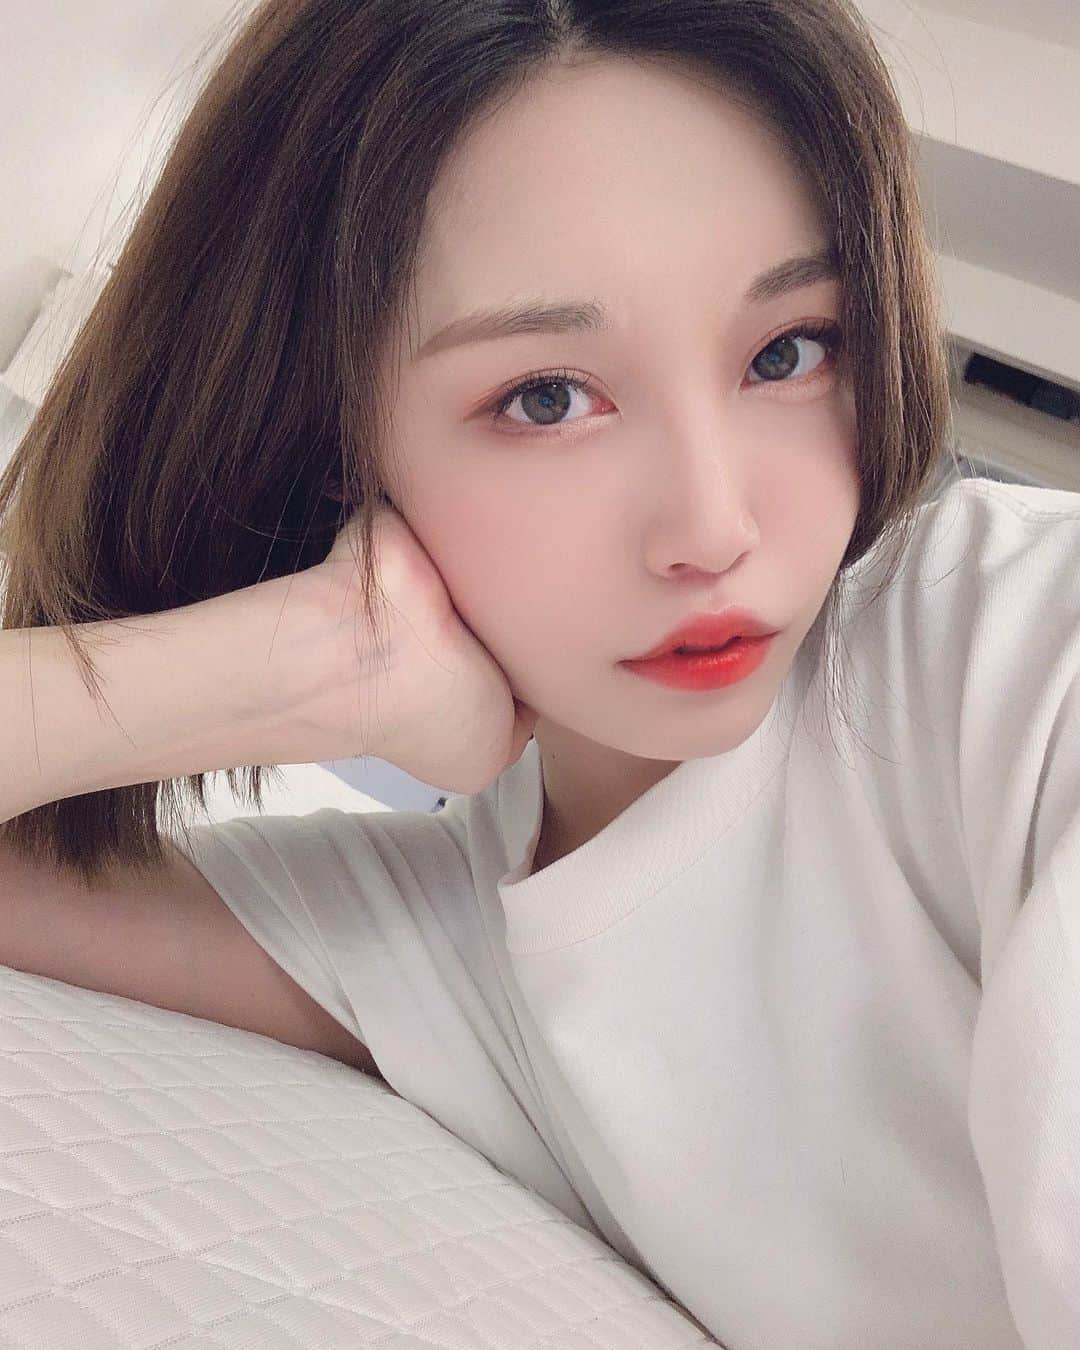 Rabiのインスタグラム：「This is my real eye color.🙂 Actually this is my first time posting a photo of me without color contacts. lol I prefer the way I look when wearing contacts so I’m wearing brown or grey lenses all the time, but lately I start liking my real eye color. ﻿ ﻿ What is your eye color? ﻿ ﻿ ┈︎┈︎┈︎┈︎┈︎┈︎┈︎┈︎┈︎﻿ #데일리﻿ #일본﻿ #일본스냅﻿ #도쿄 ﻿ #생활  #일상﻿ #단발 ﻿ #머리﻿ #裸眼メイク﻿ #japanesegirl」